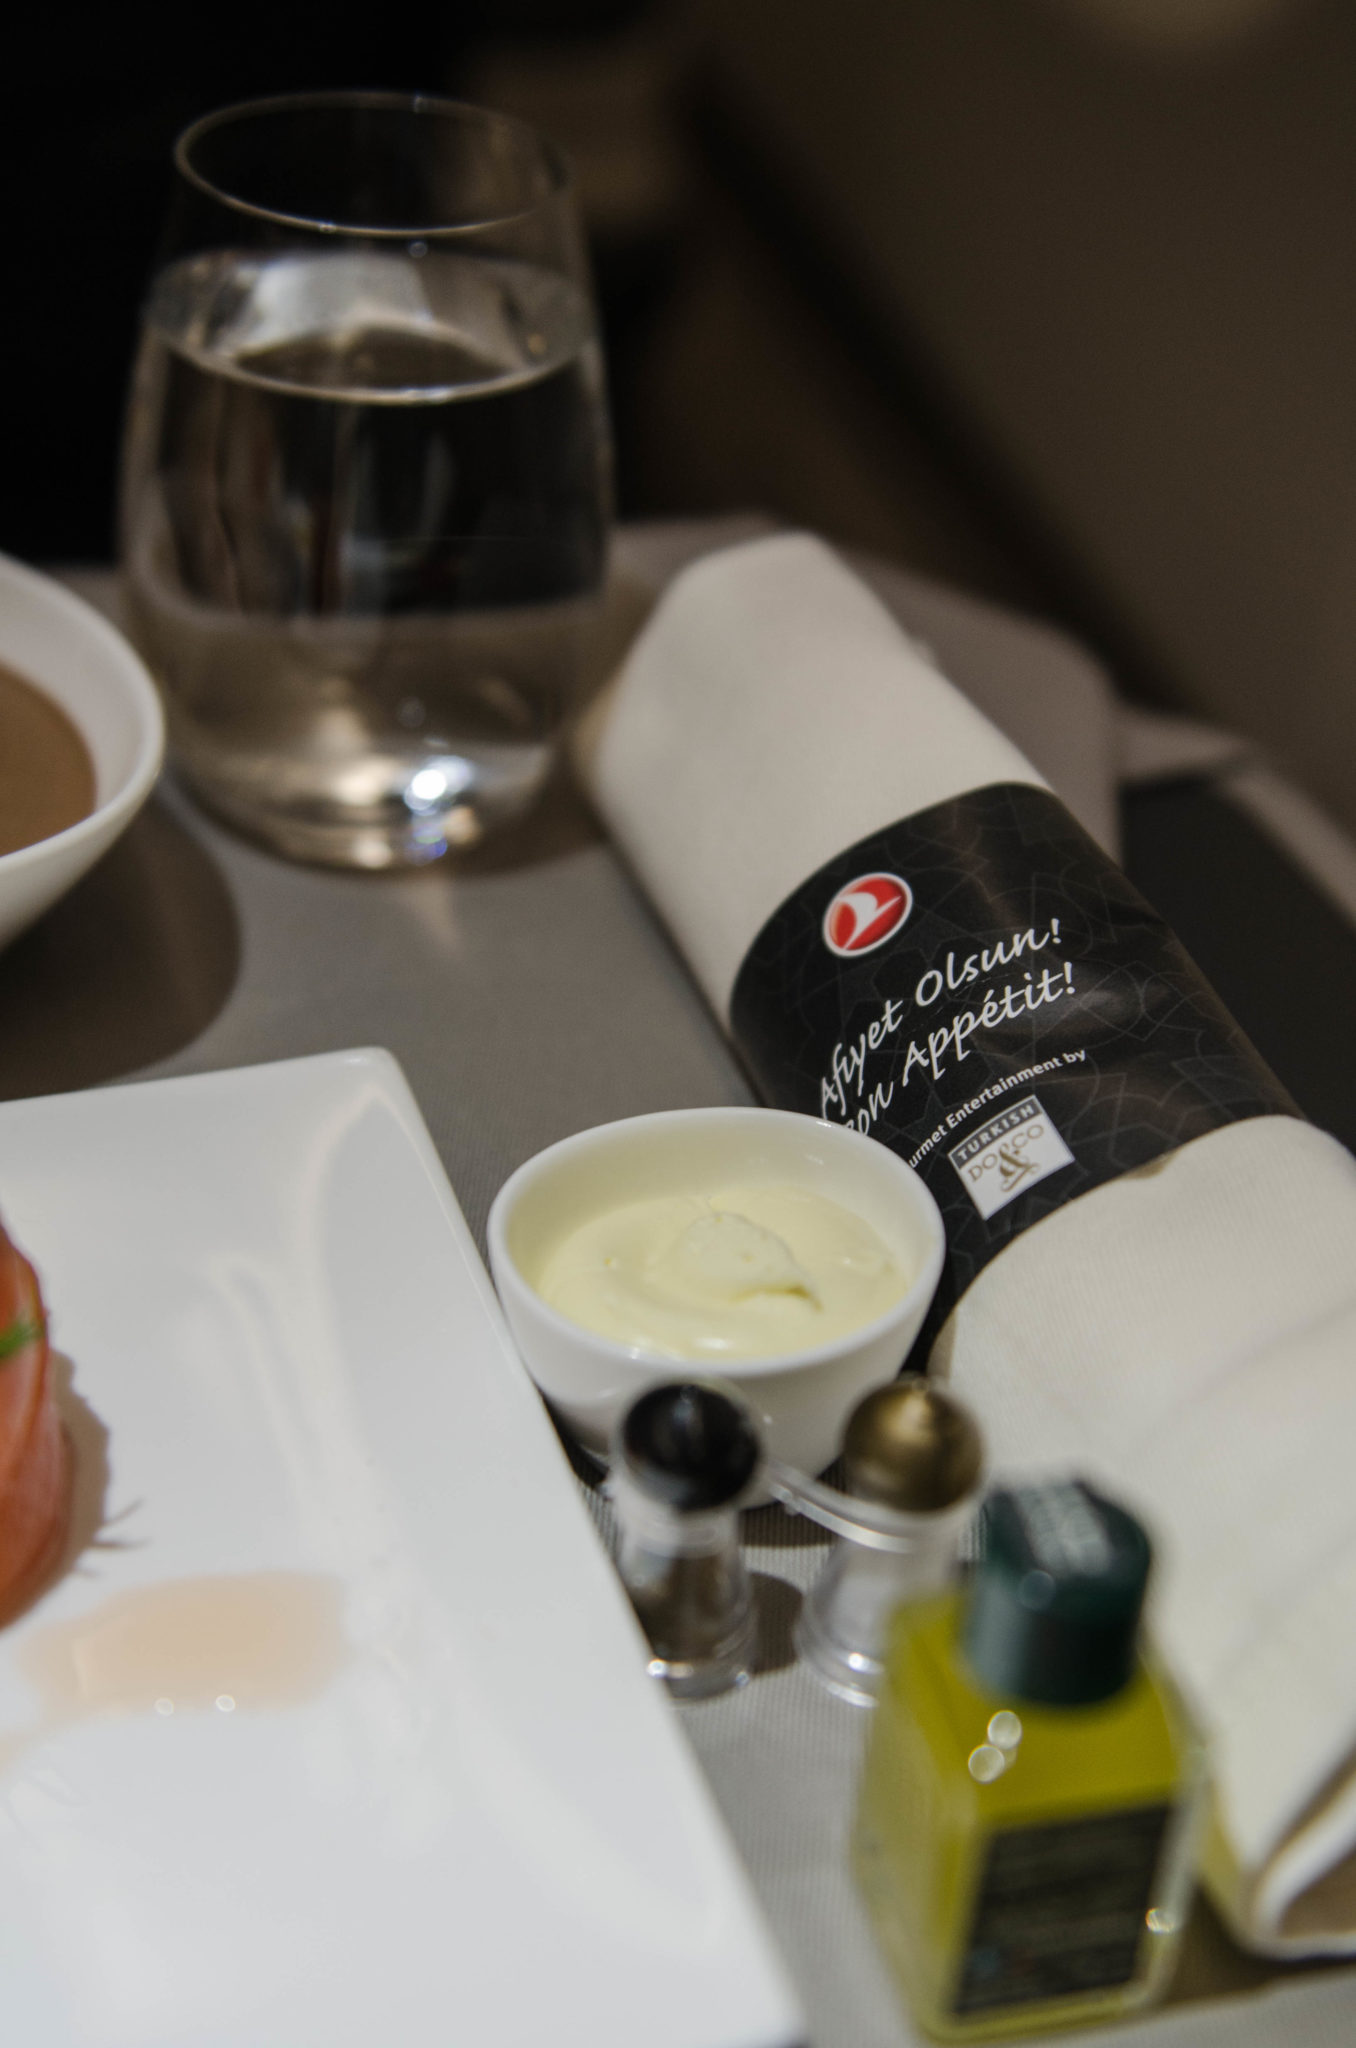 Turkish Airlines Business Class: Jetzt im Review